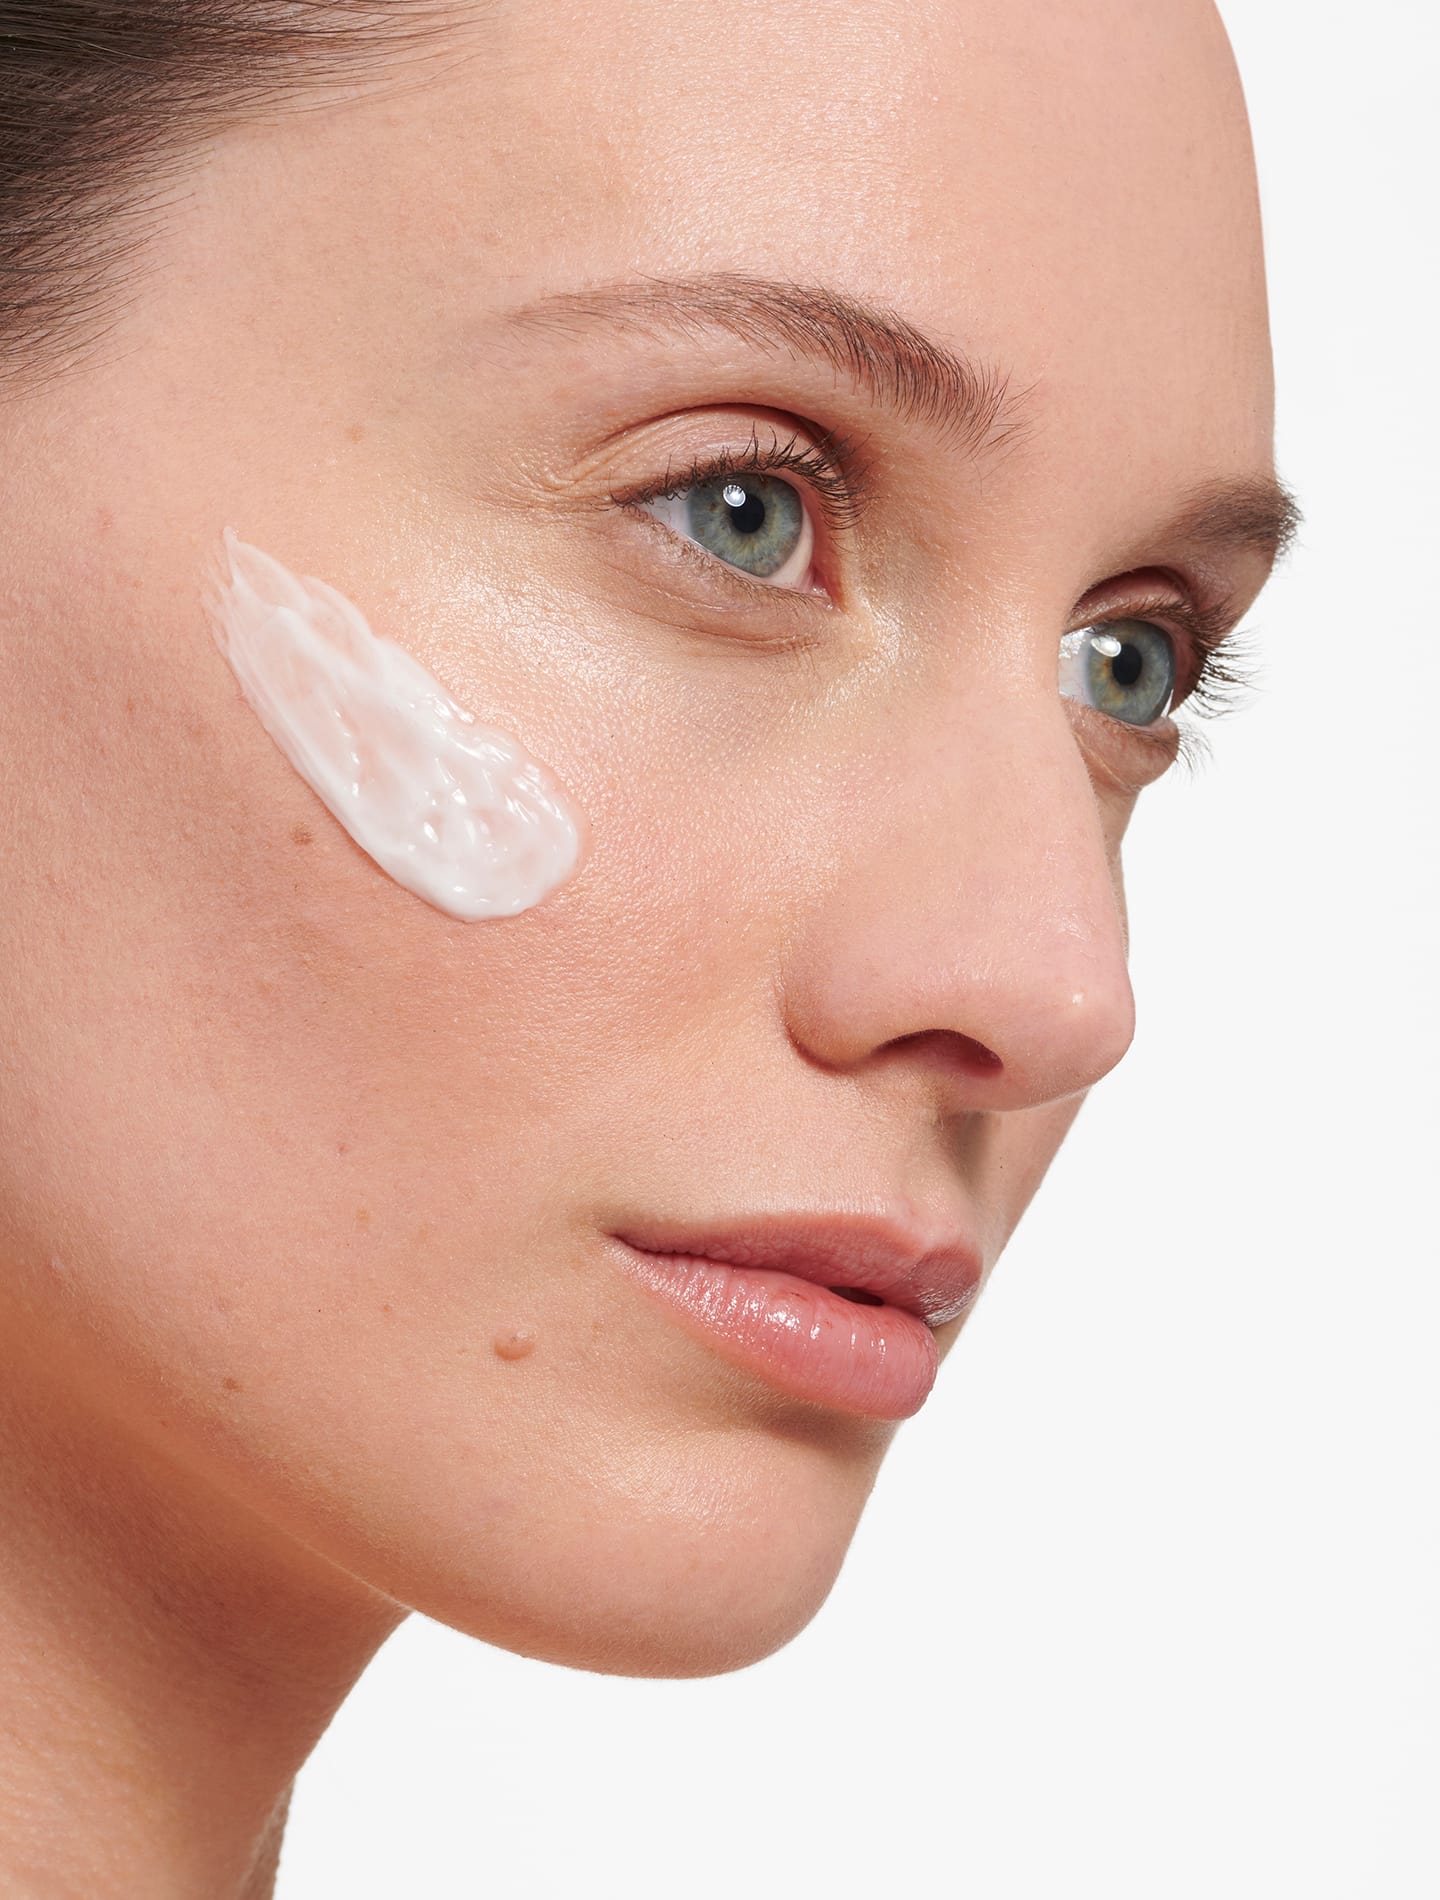 Uneven Skin Tone: A Wholistic Guide to Treating This Skin Concern